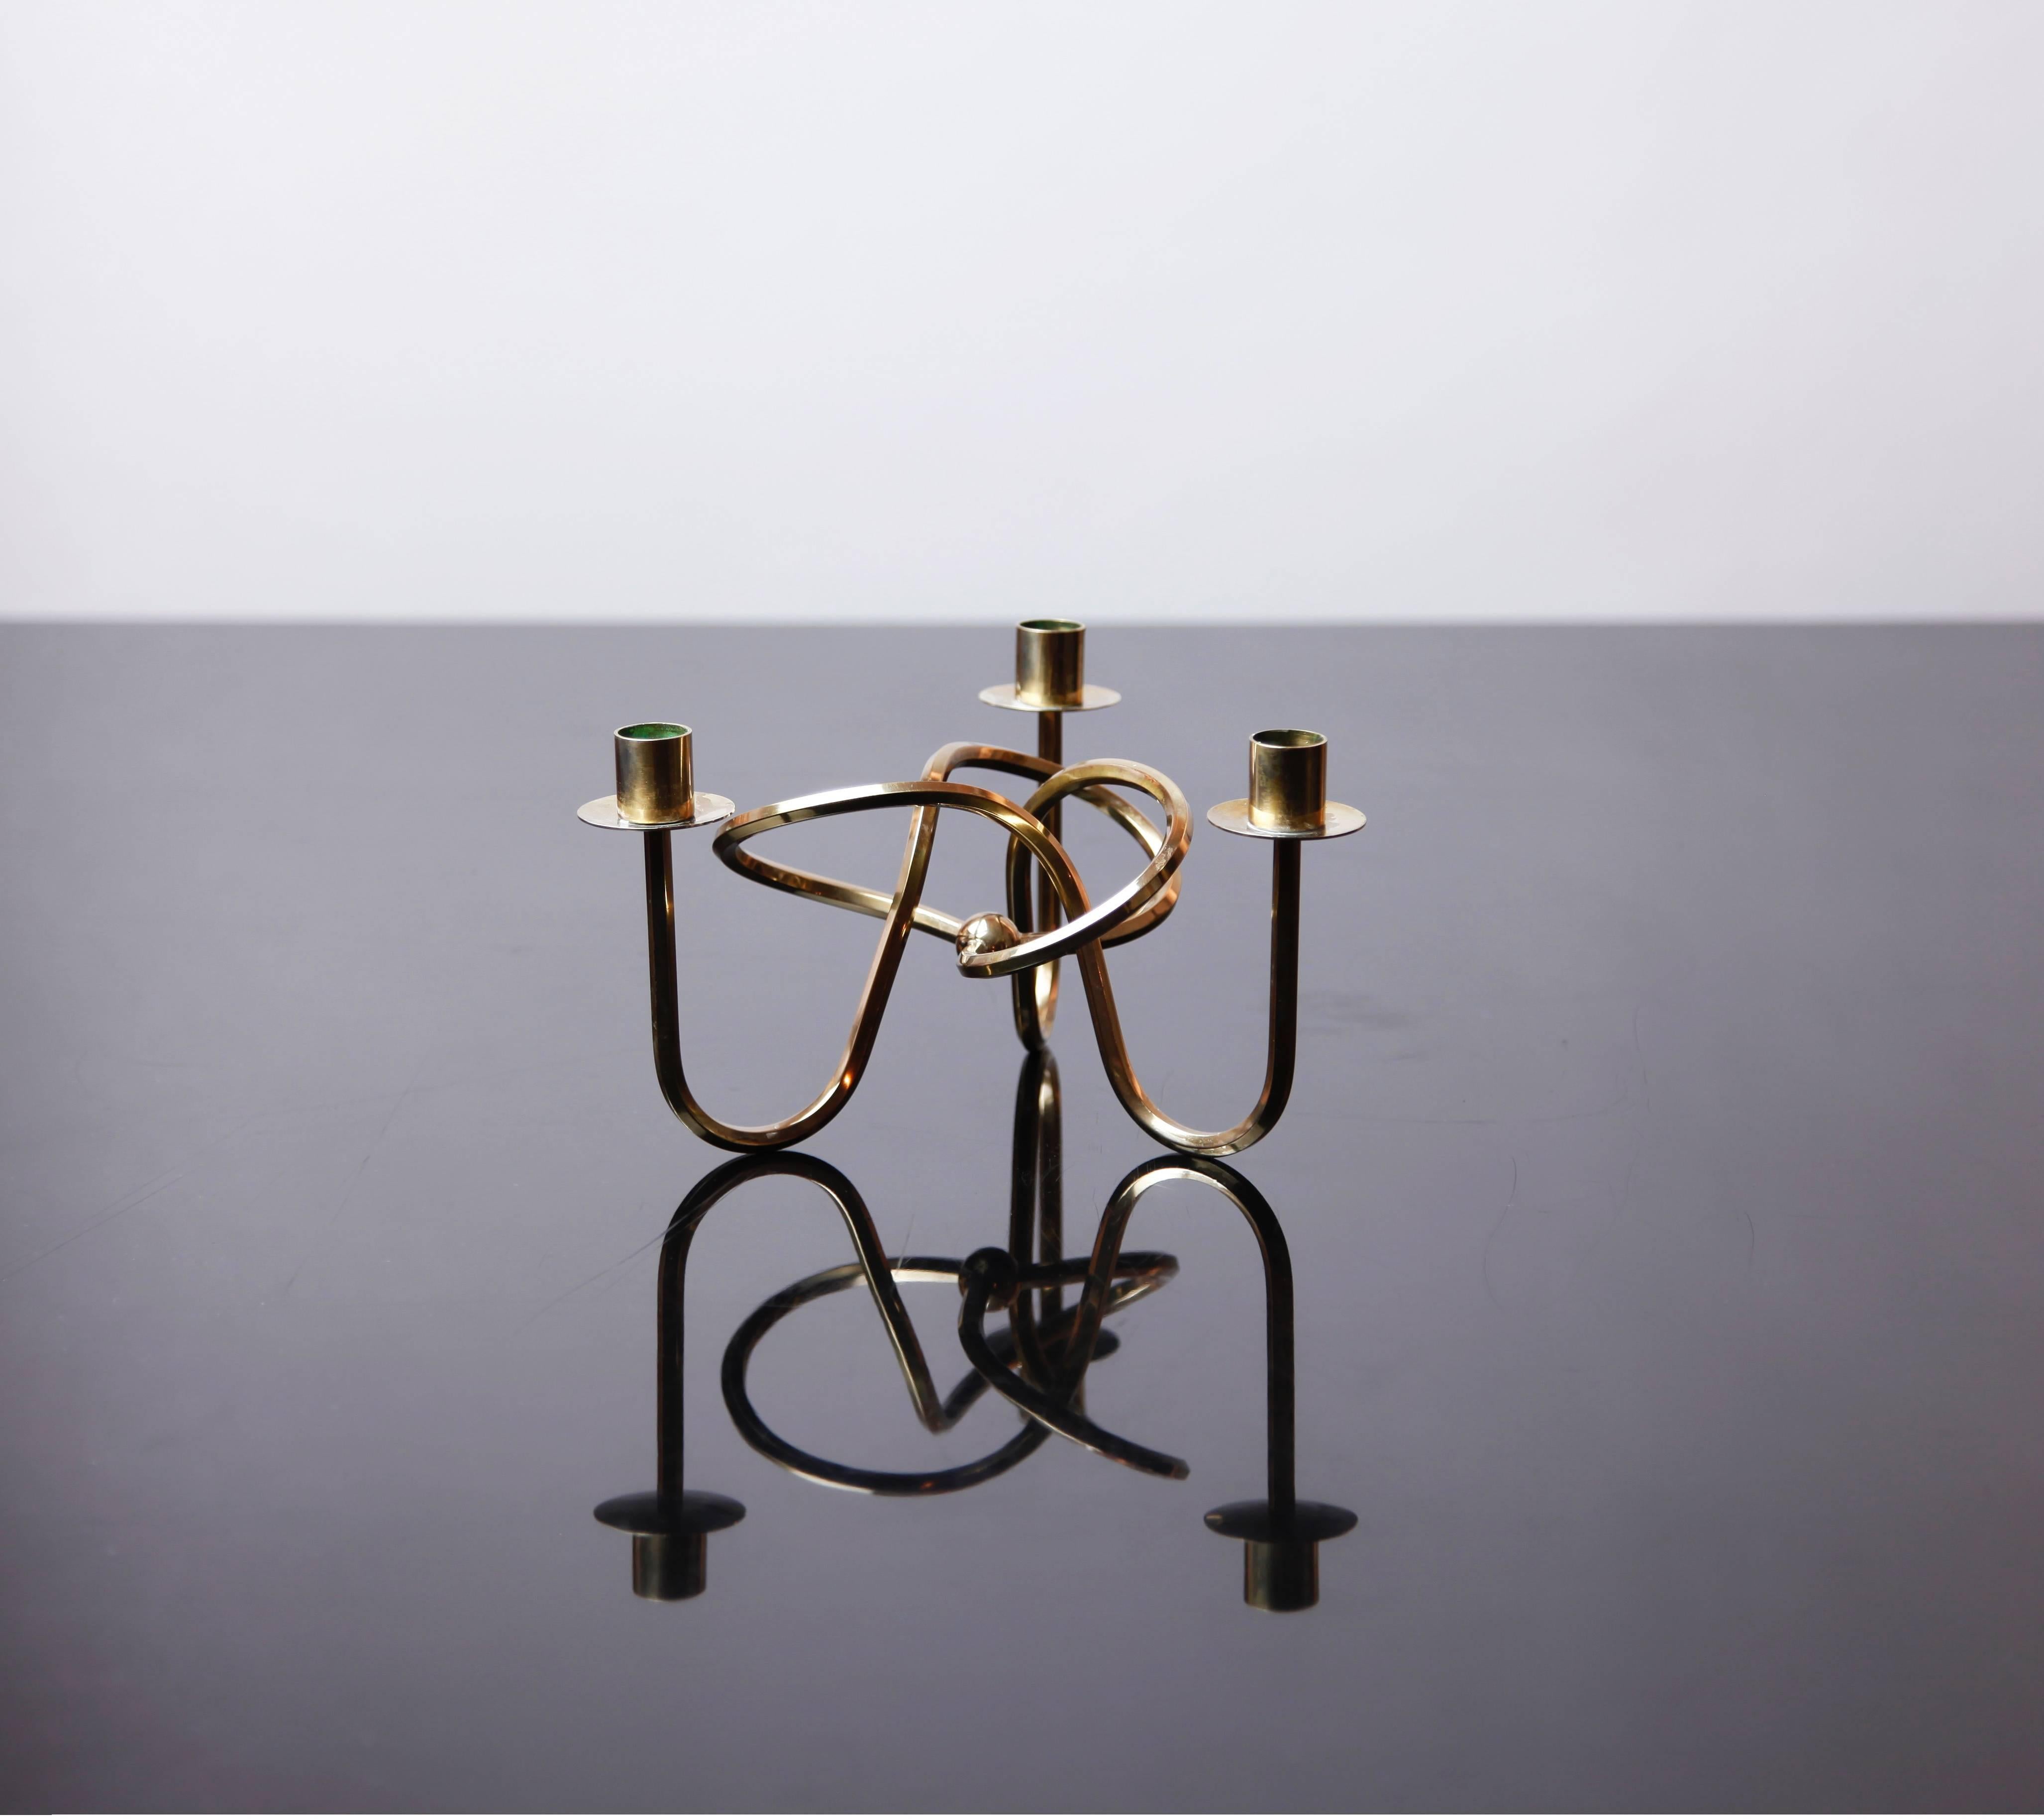 Josef Frank designed this brass candelabra for Svenskt Tenn in the 1950s. The graceful arabesques that join the three candles are what give it the name of Vänskapsknuten, or friendship knot.